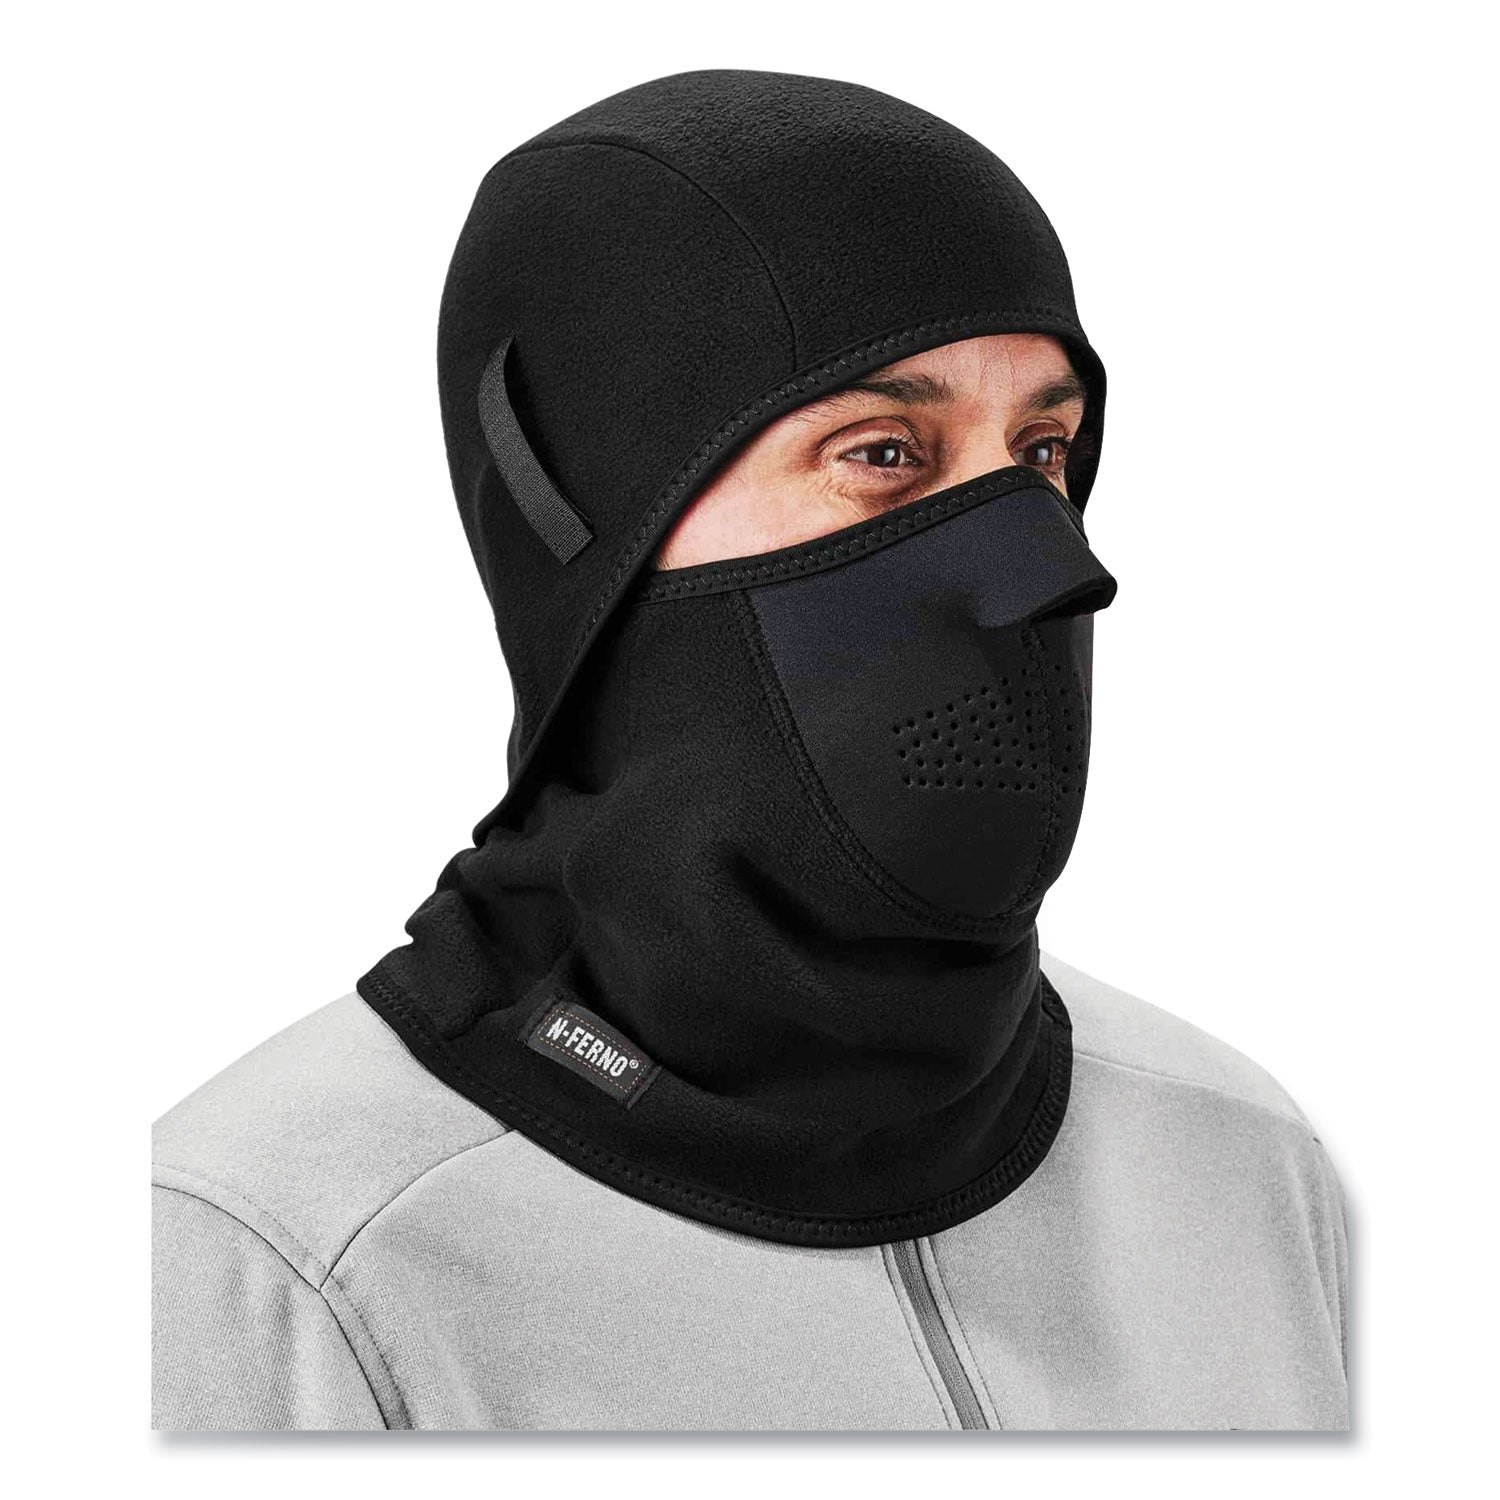 n-ferno-6827-2-piece-fleece-neoprene-balaclava-face-mask-one-size-fits-most-black-ships-in-1-3-business-days_ego16827 - 3